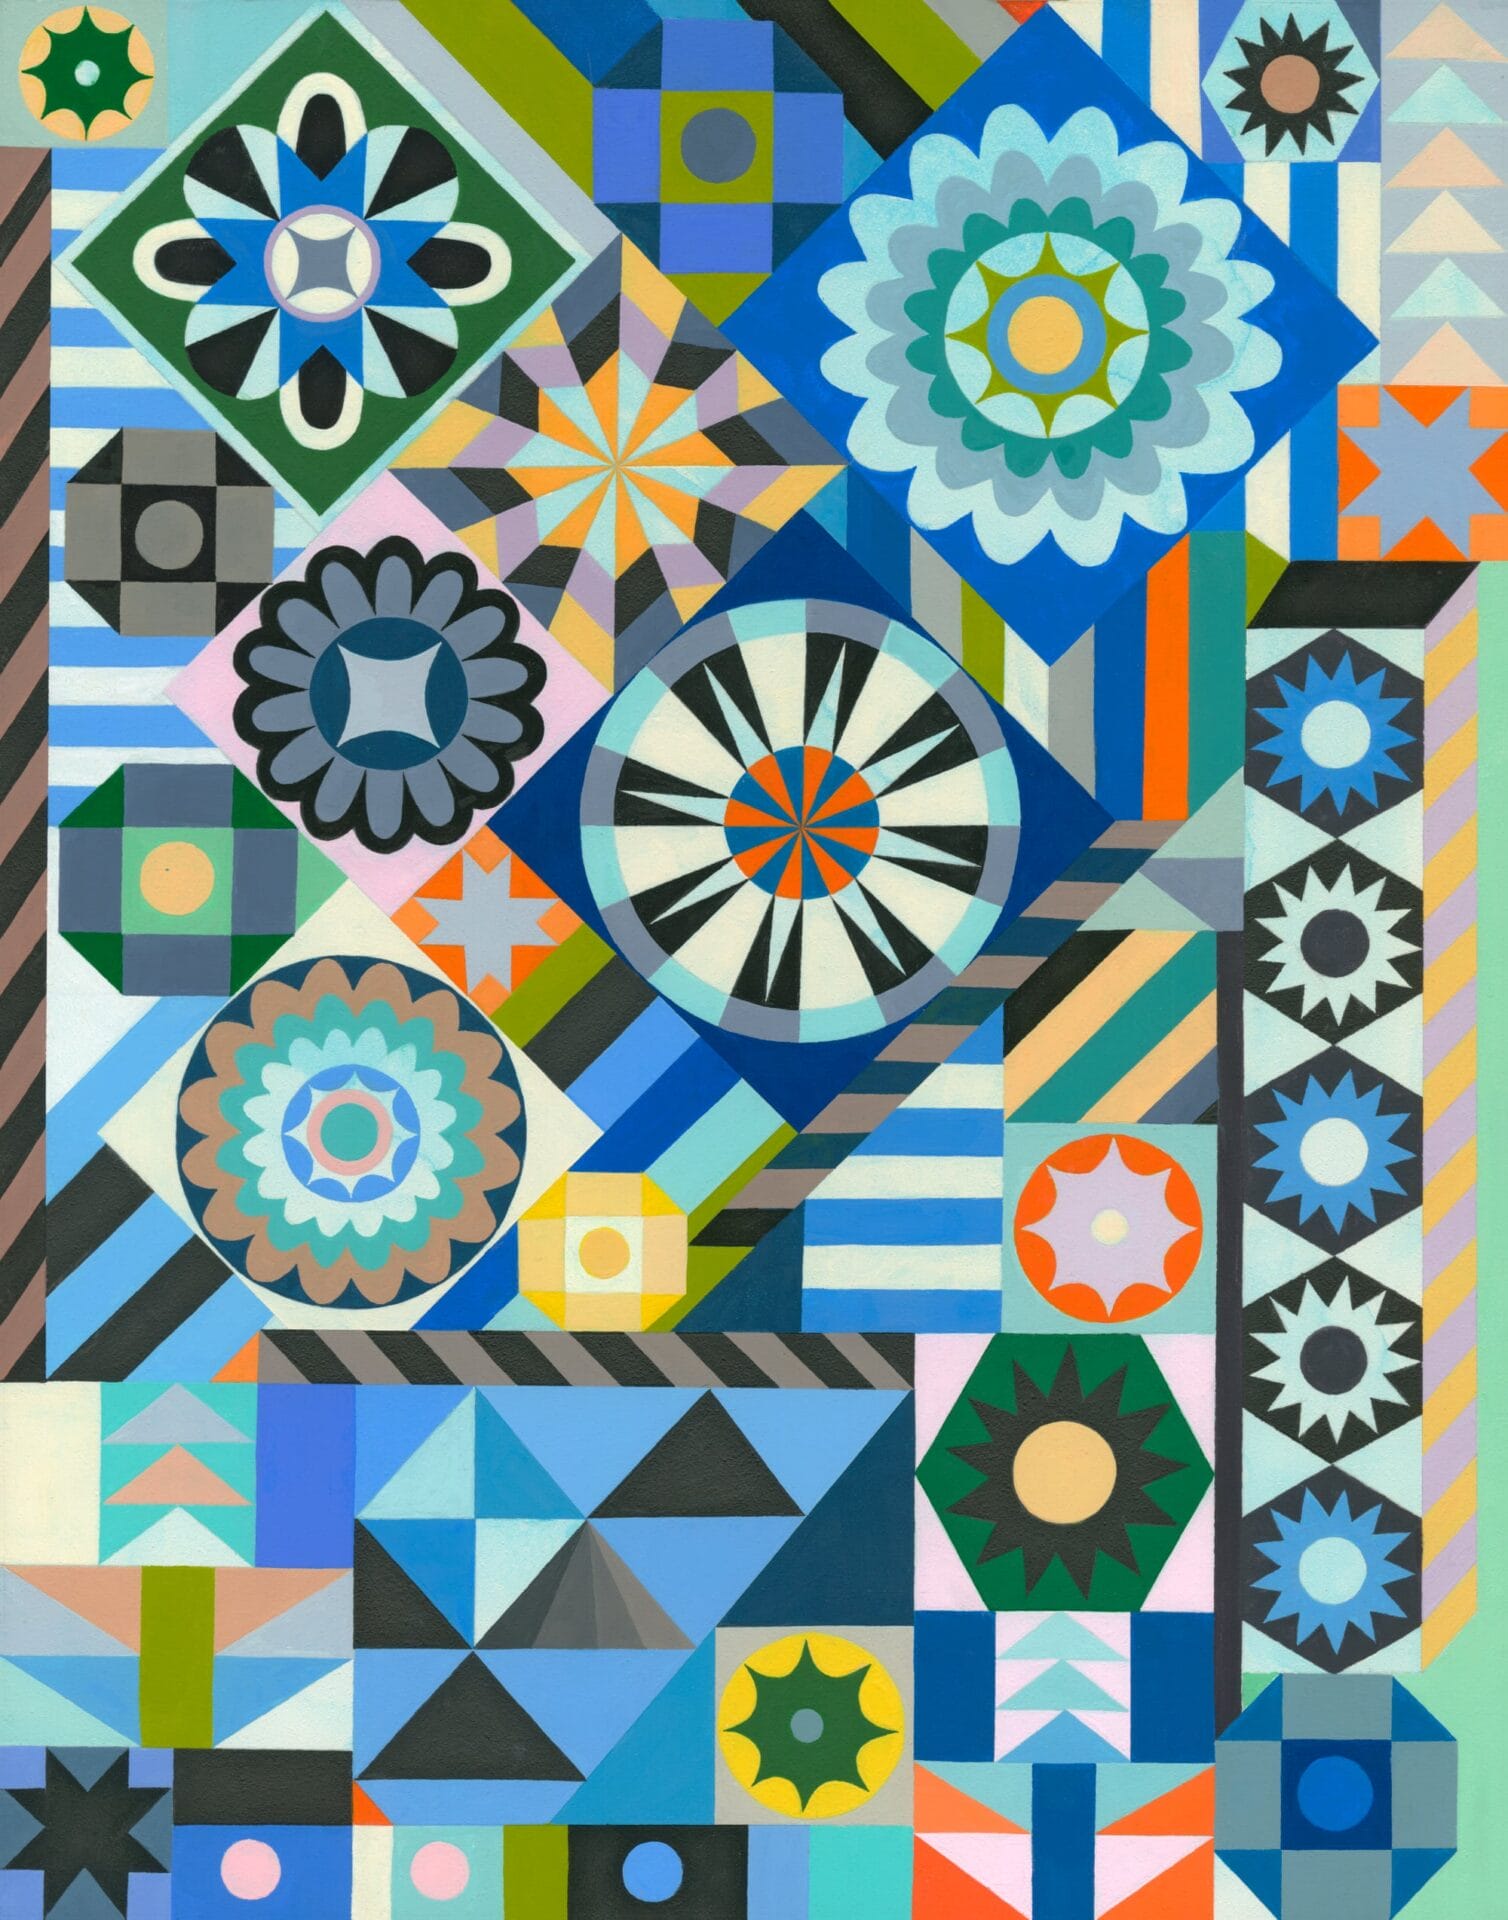 a patchwork painting with stripes, shapes, and various motifs in a blue green palette